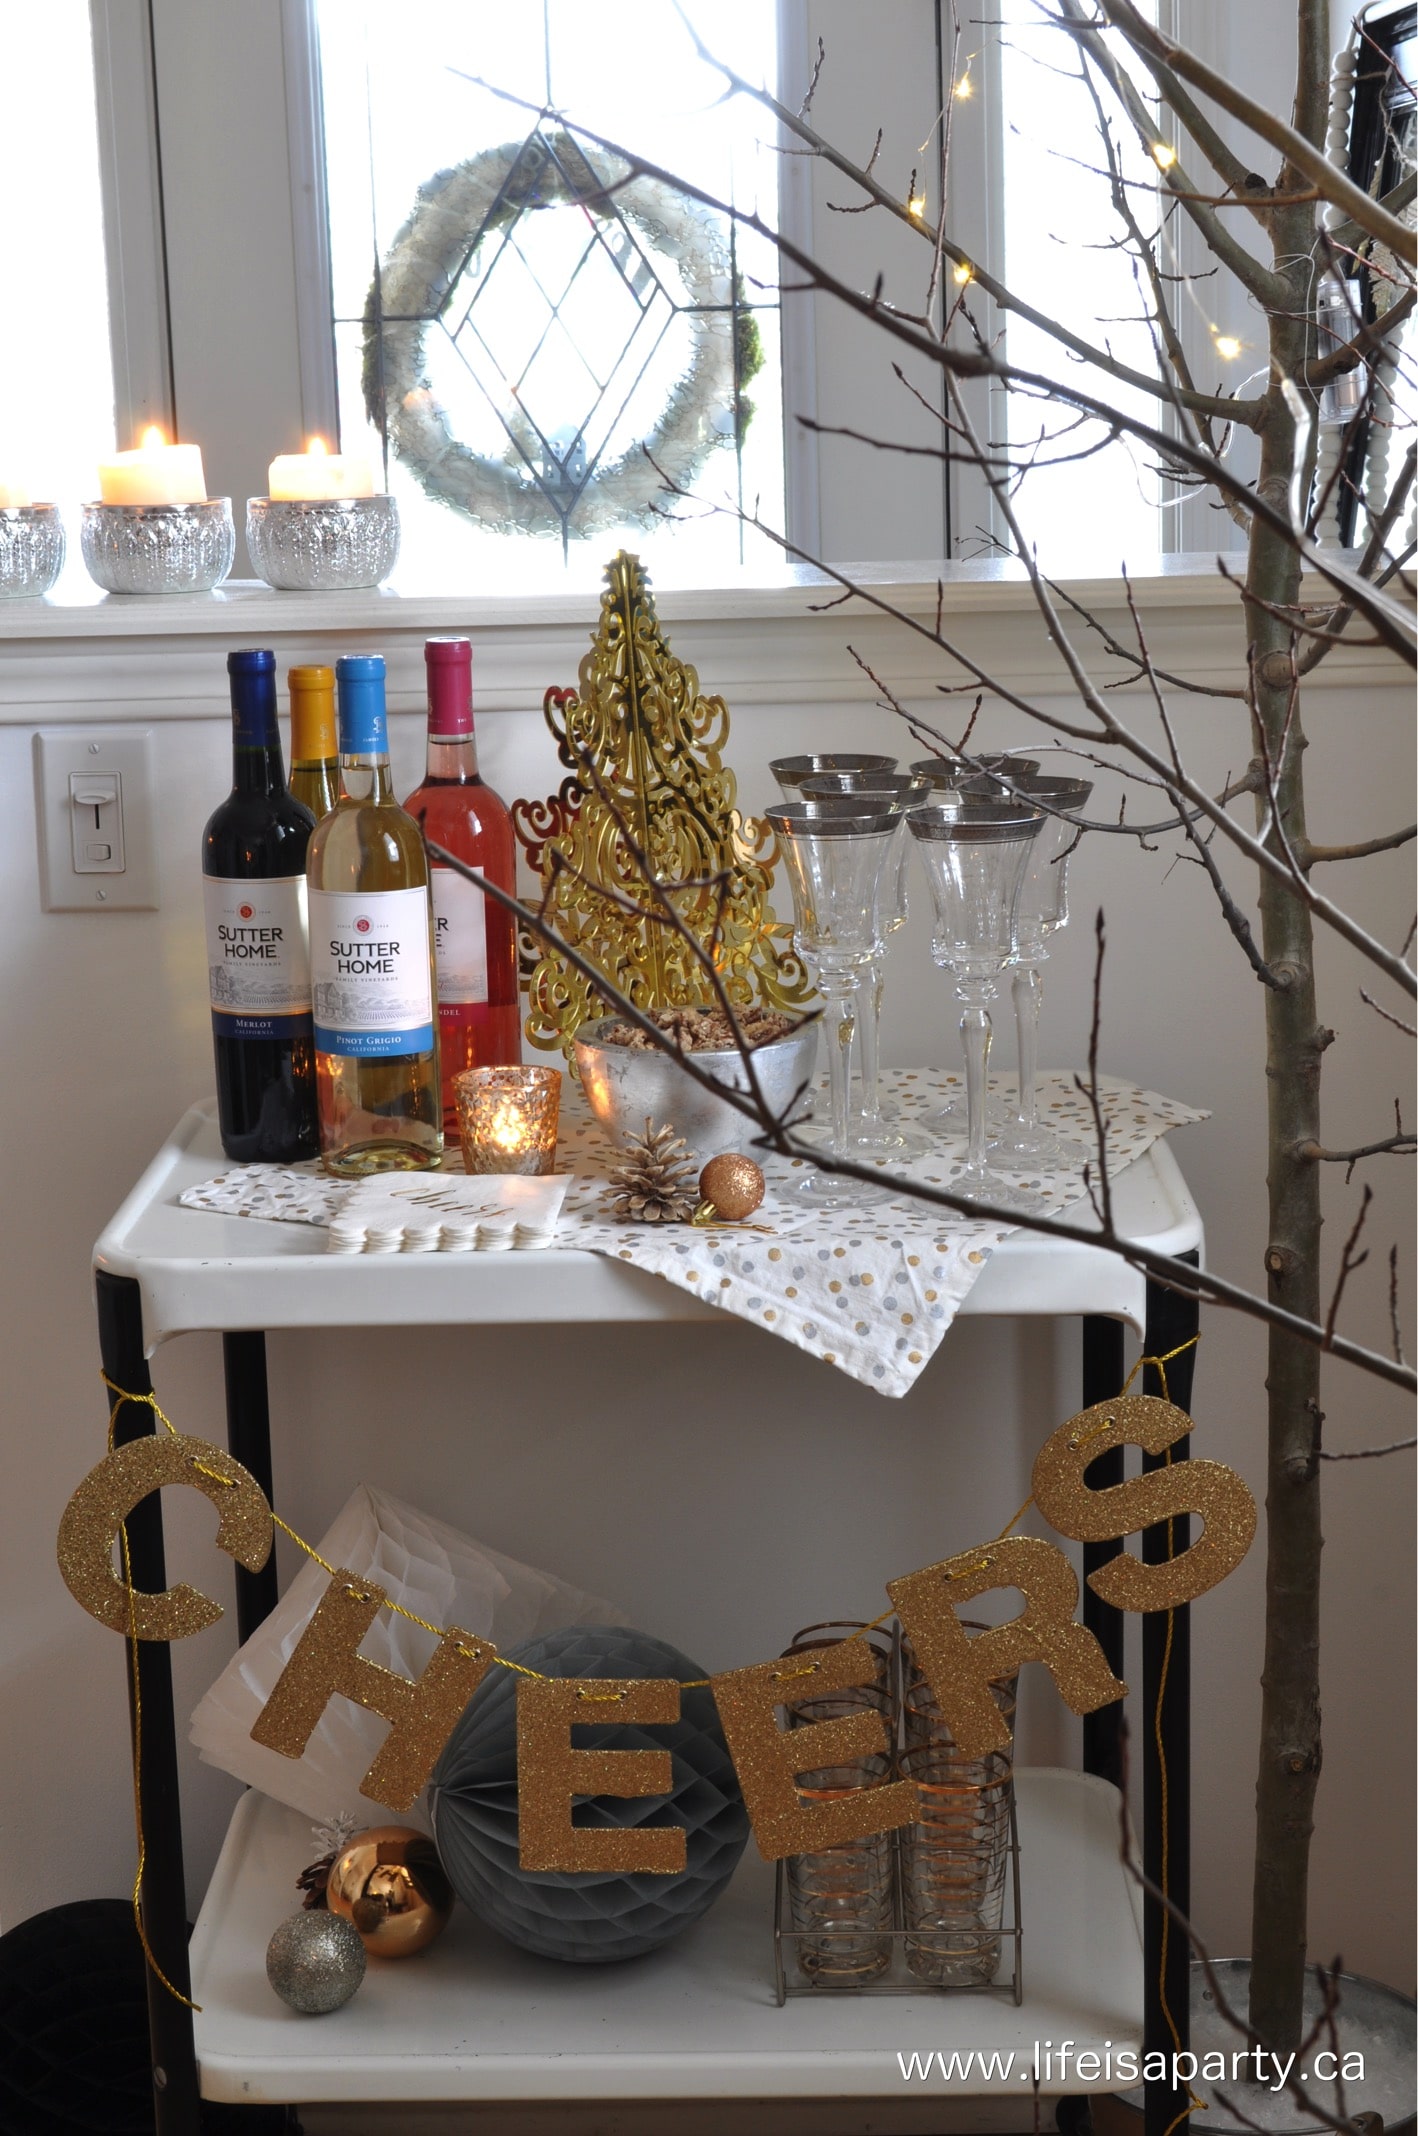 Wine bar cart set up for a party.